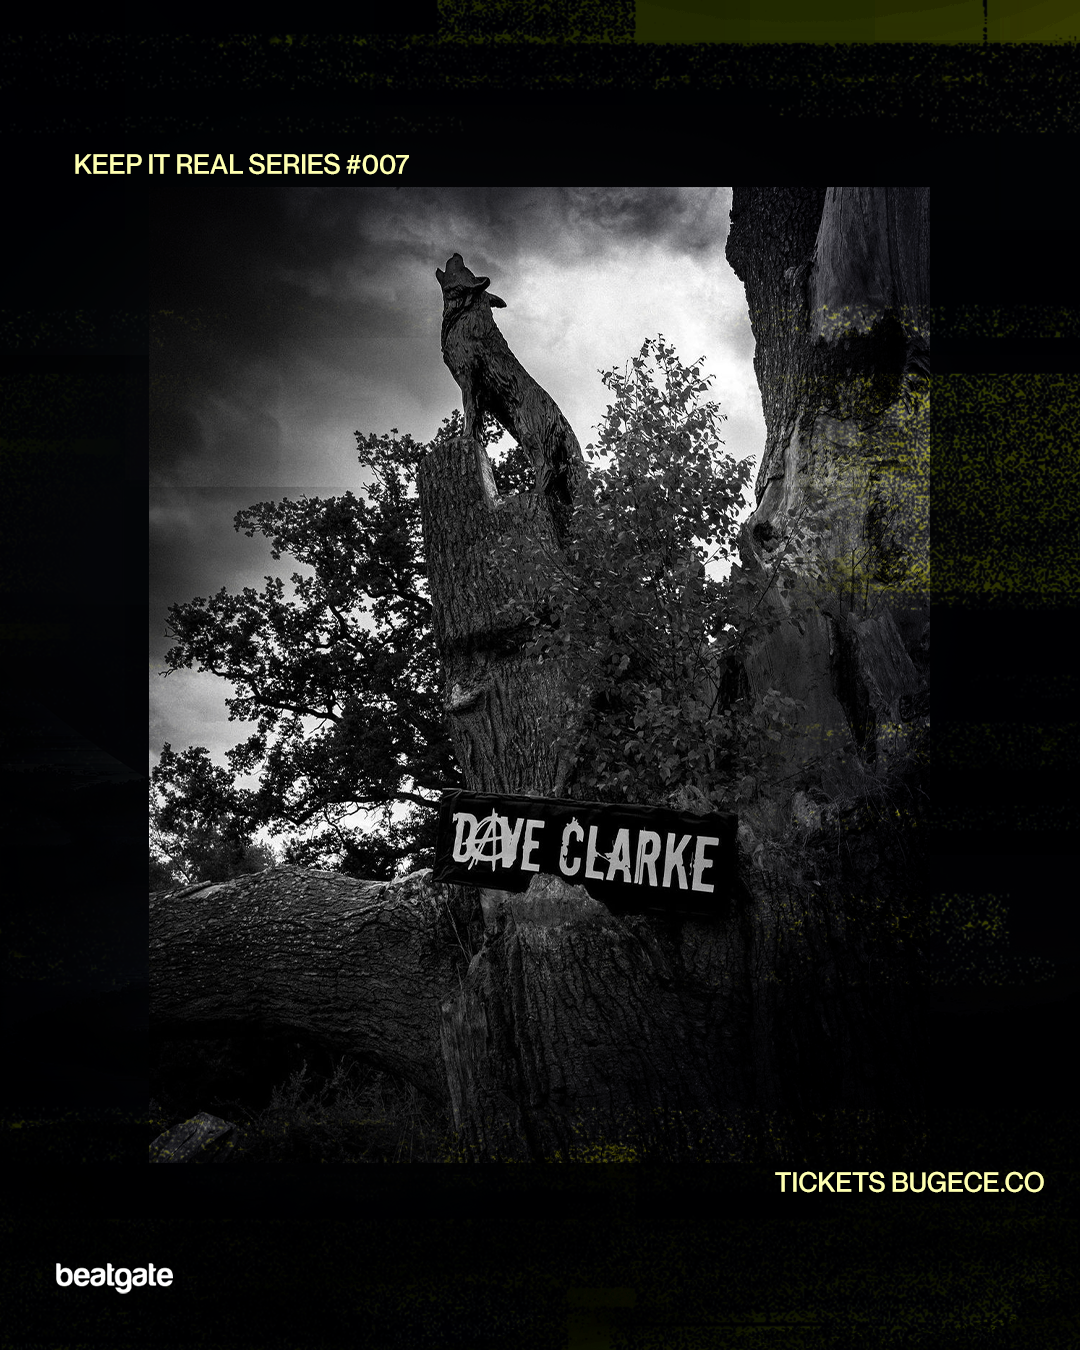 Beatgate with Dave Clarke - Keep It Real Series #007 - フライヤー表